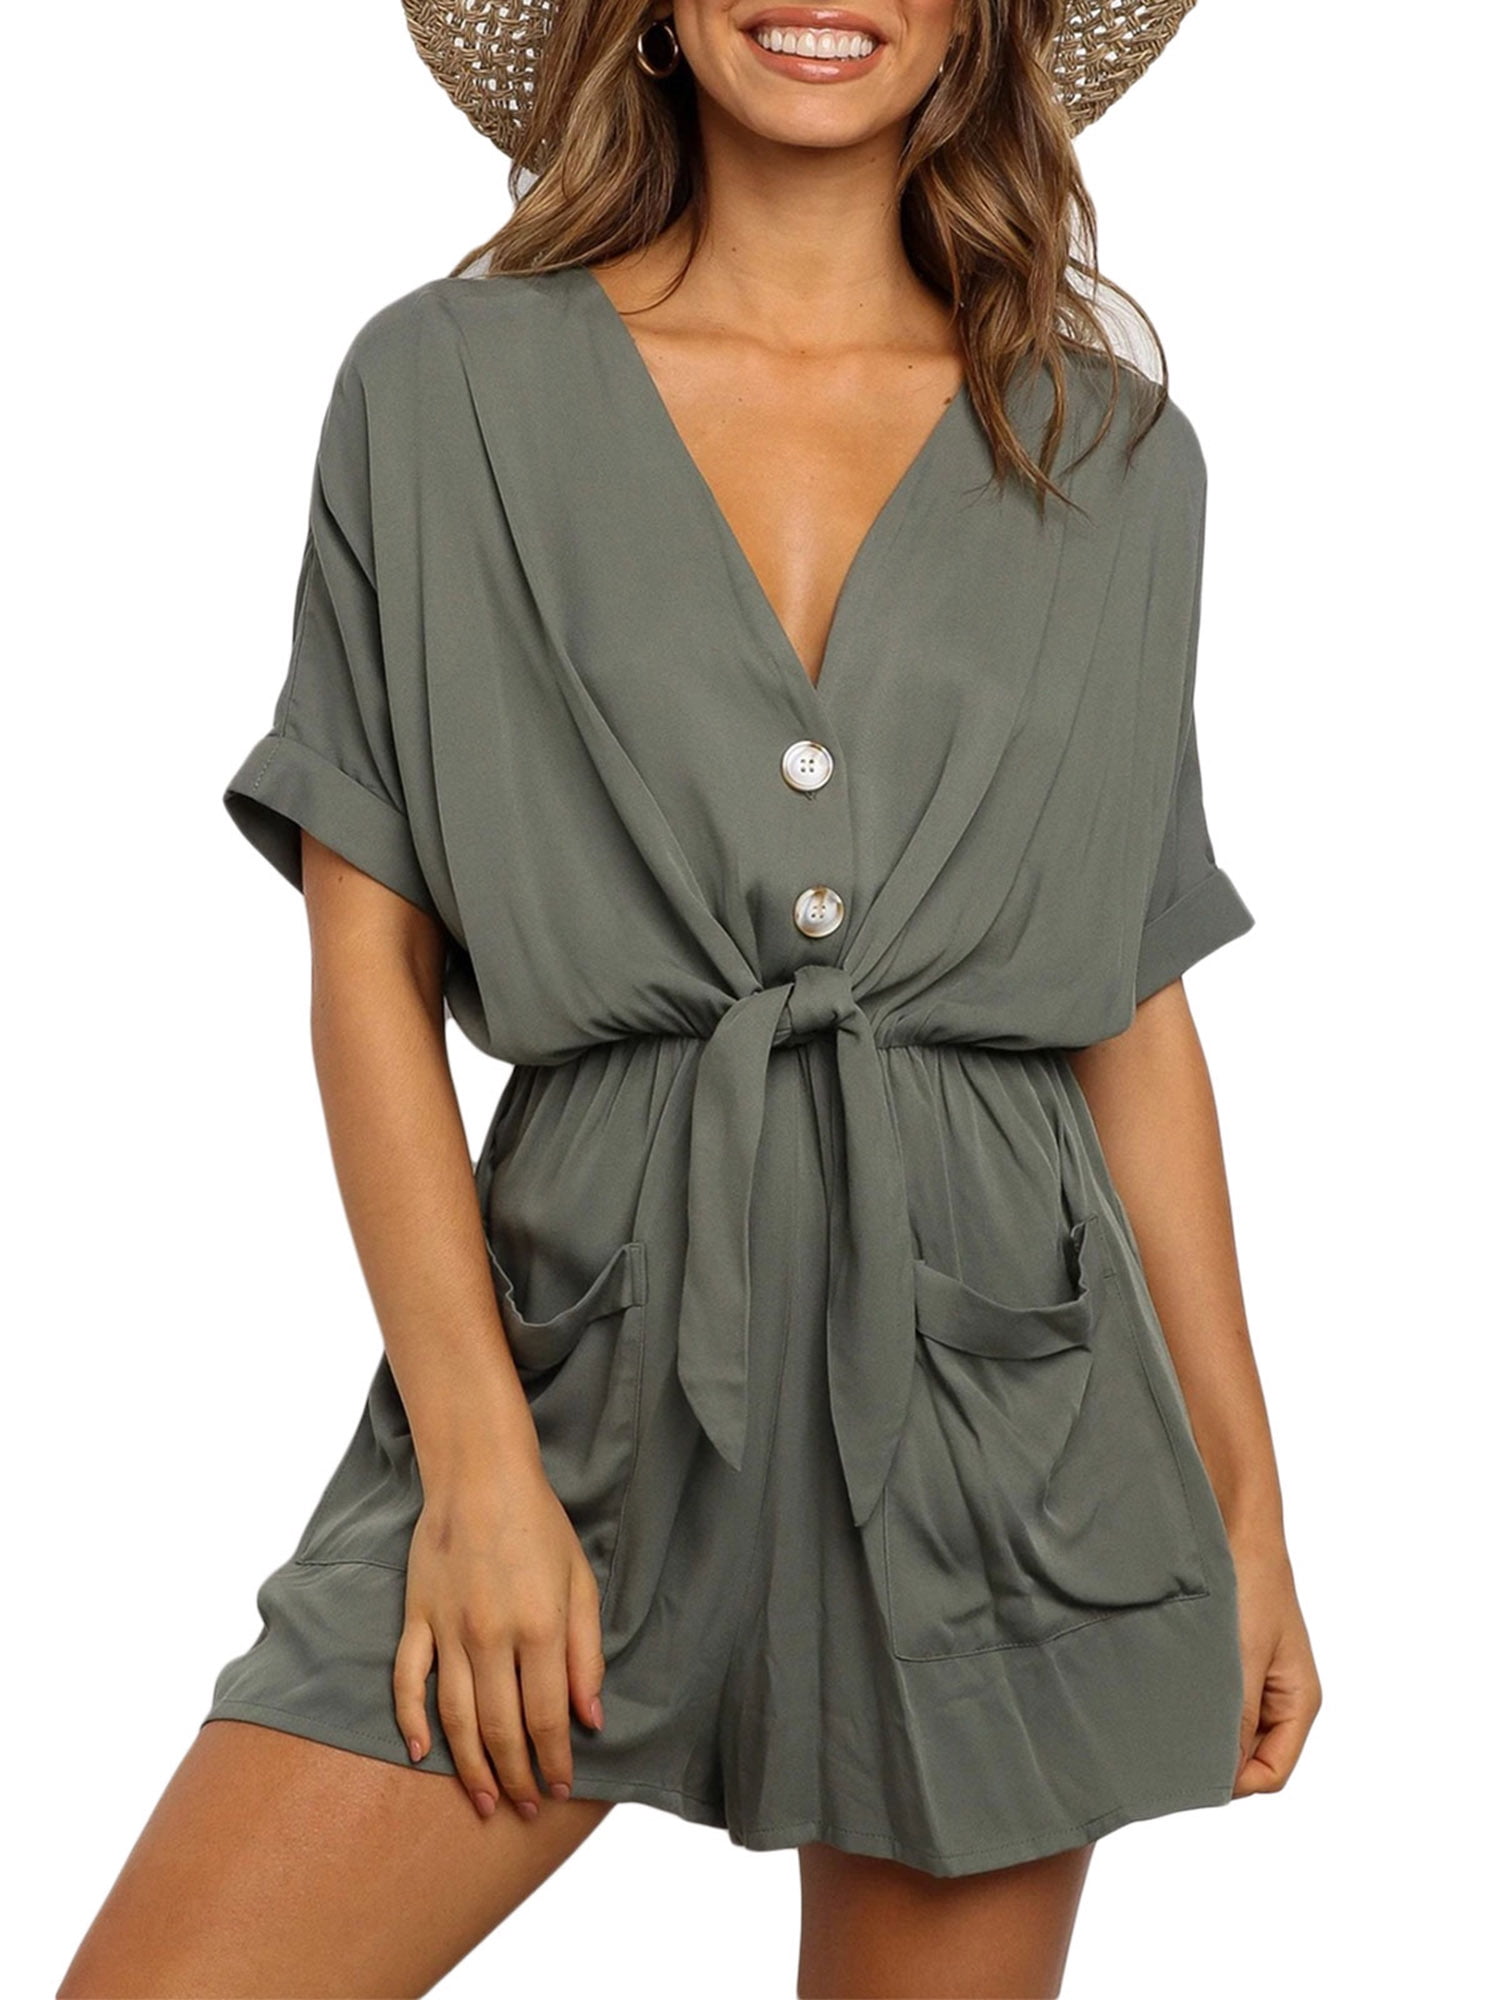 Forthery Women’s Summer V Neck Short Sleeve Button Front Self Tie Pocket Rompers Jumpsuit with Belt 